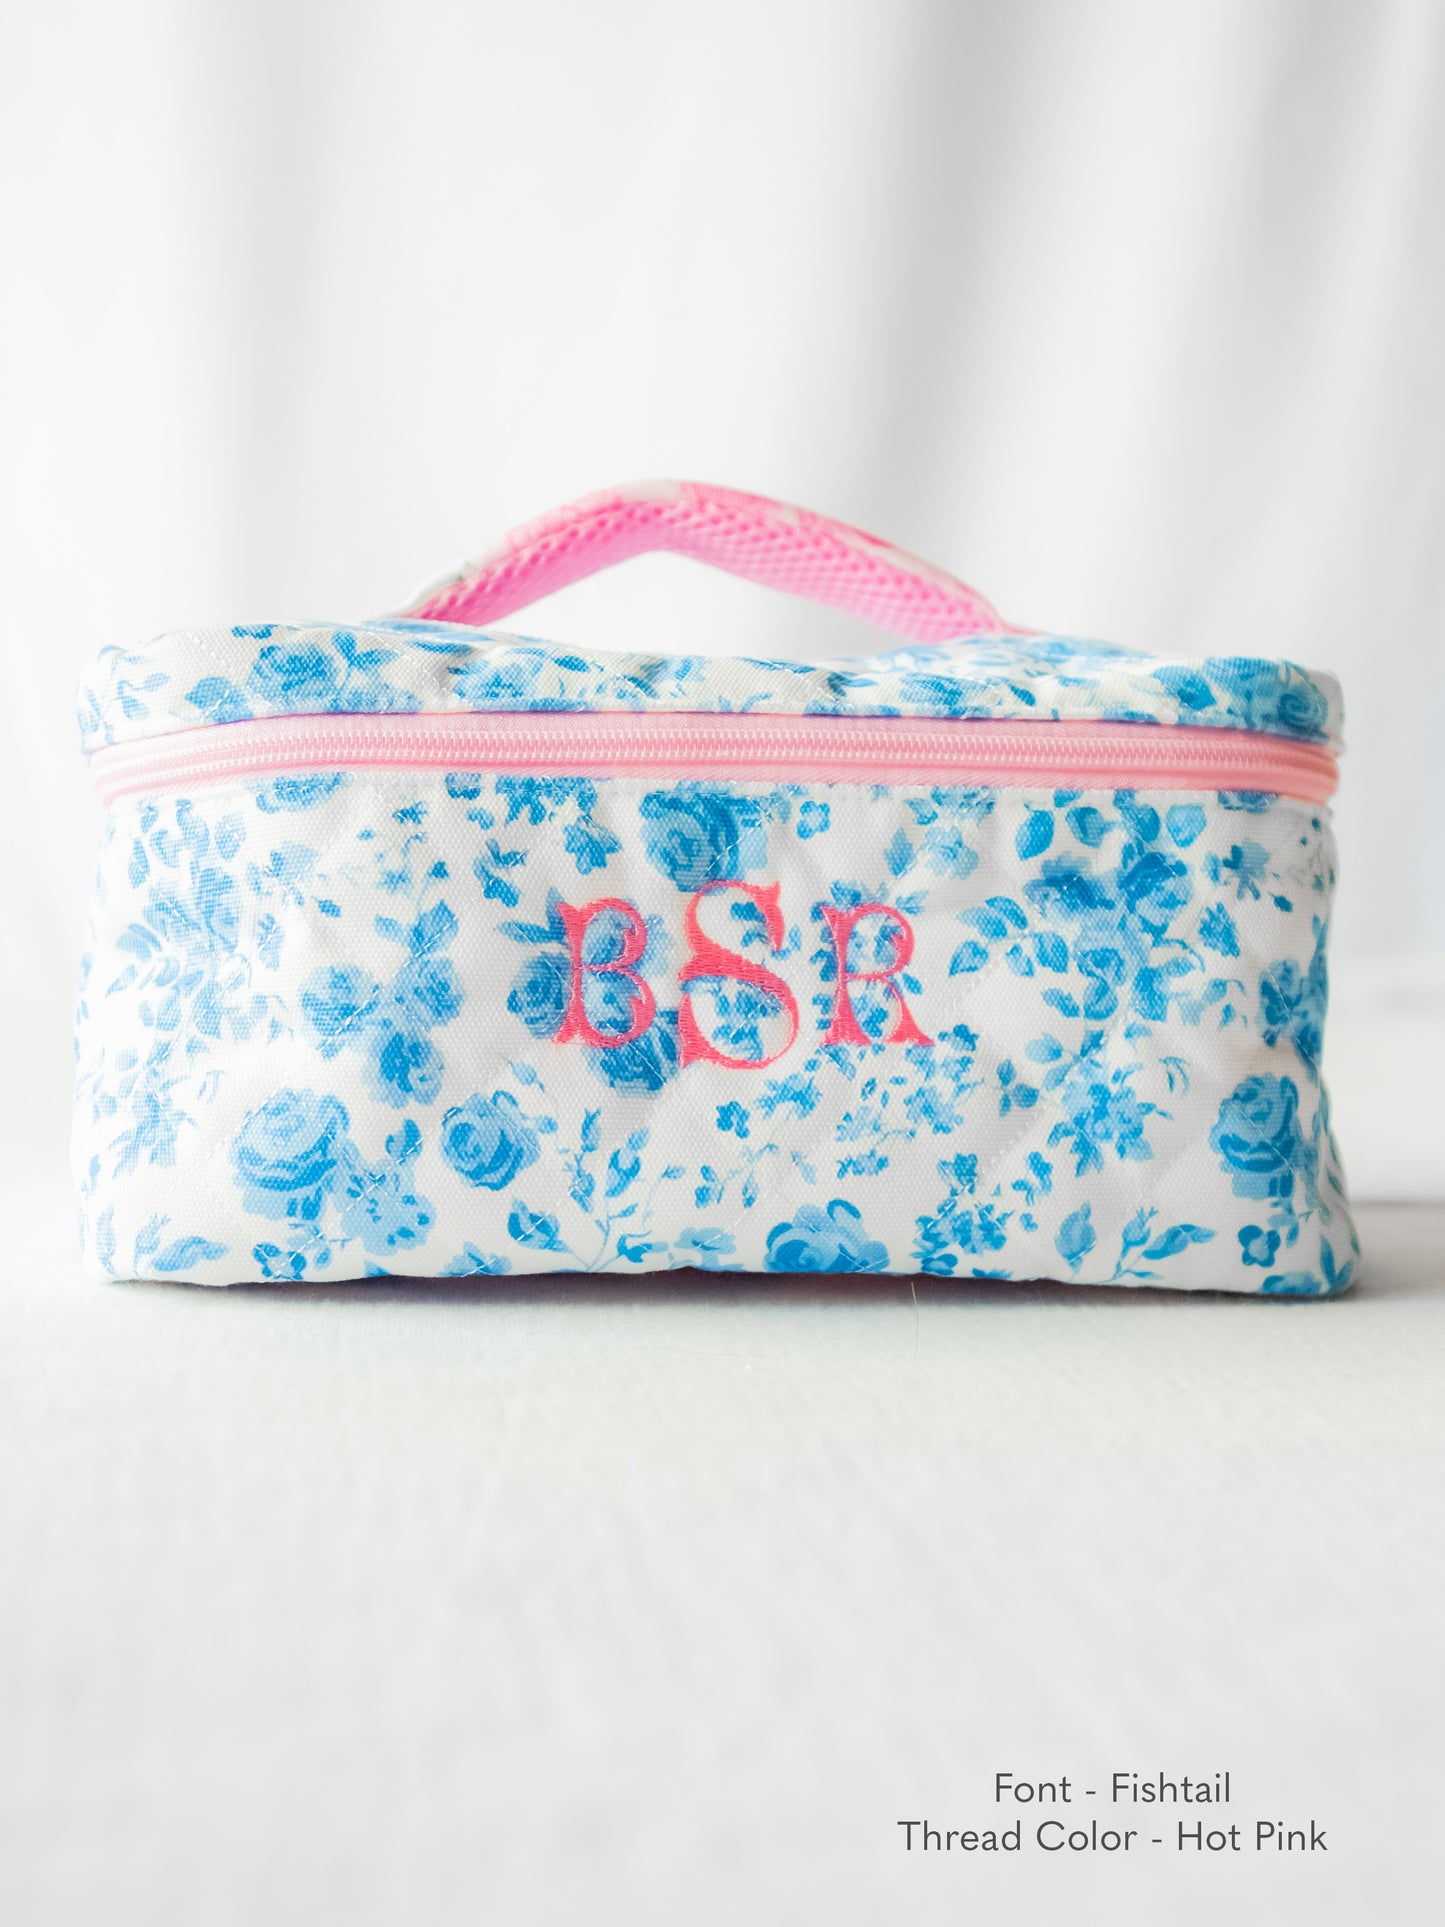 Cosmetic Case - Blooming Blues